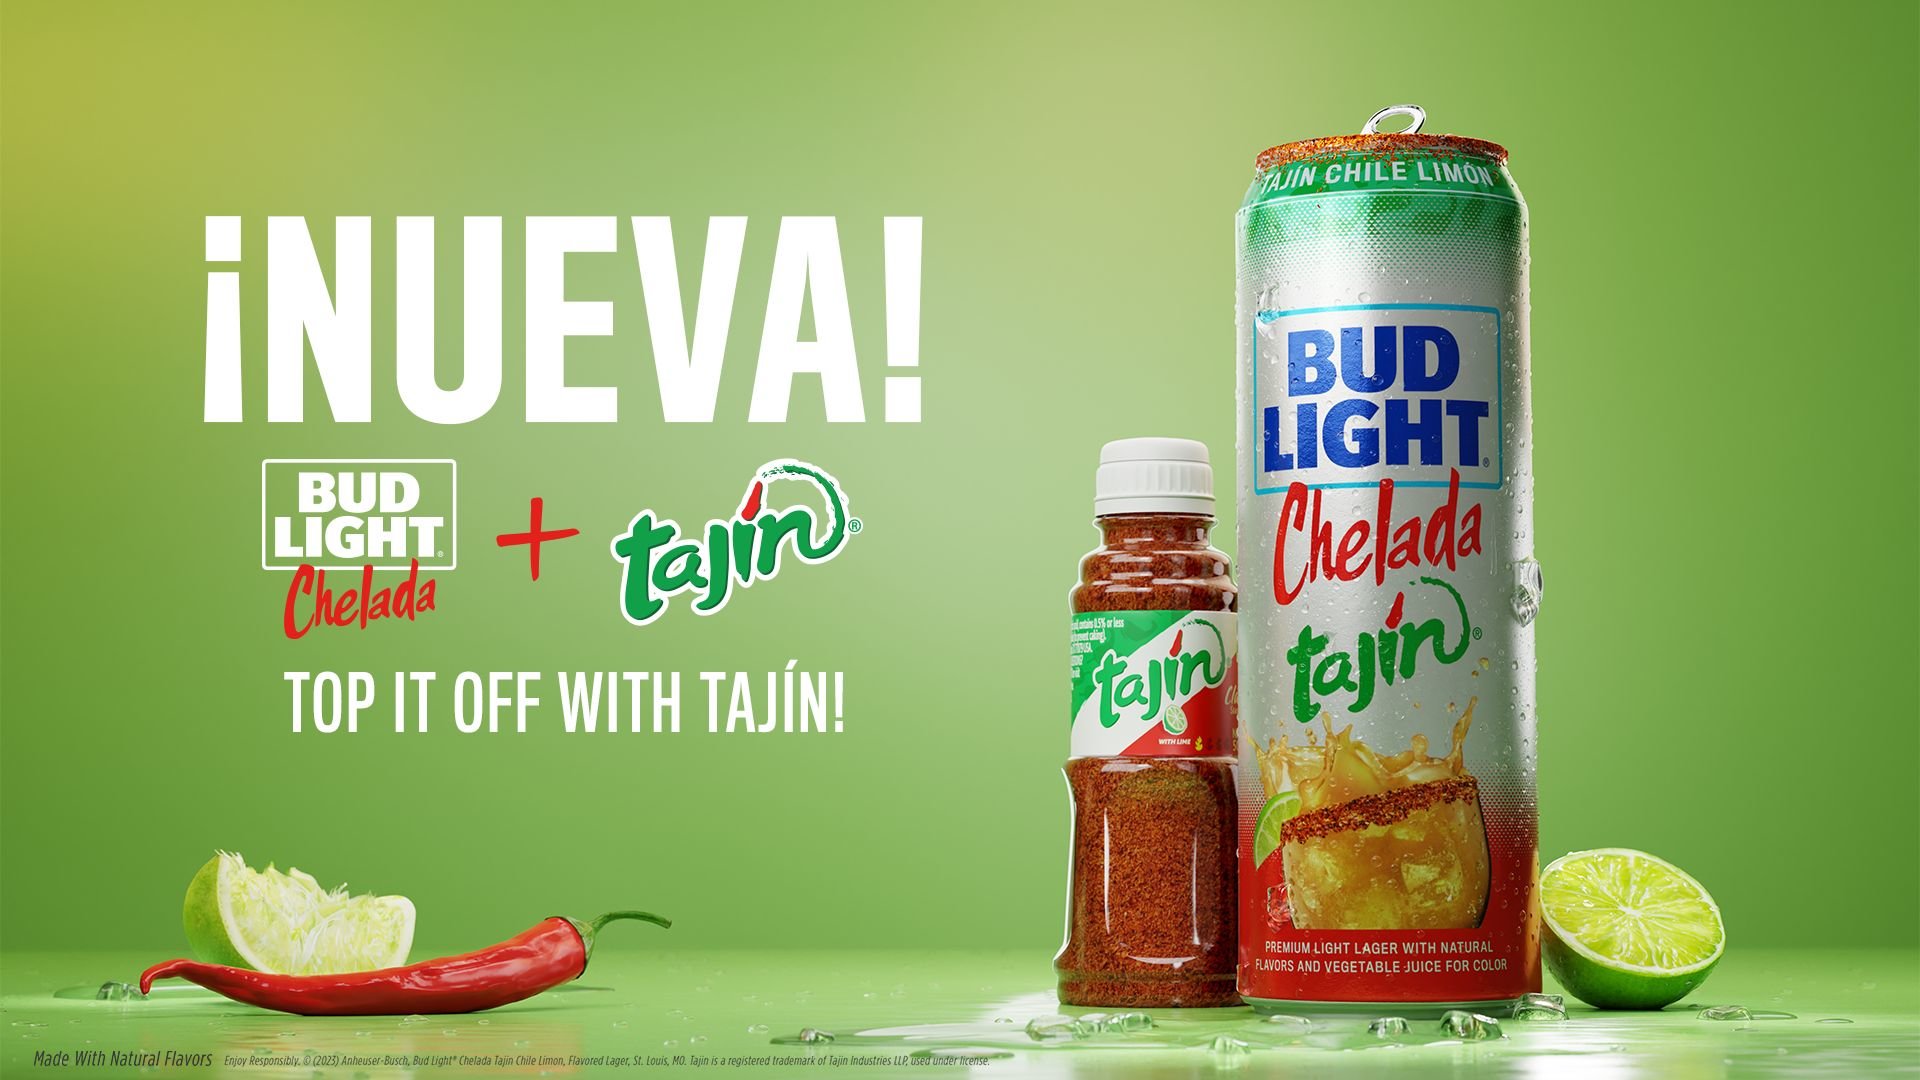 Bud Light and Tajín Are Spicing Things Up with the New Bud Light Chelada Tajín Chile Limón